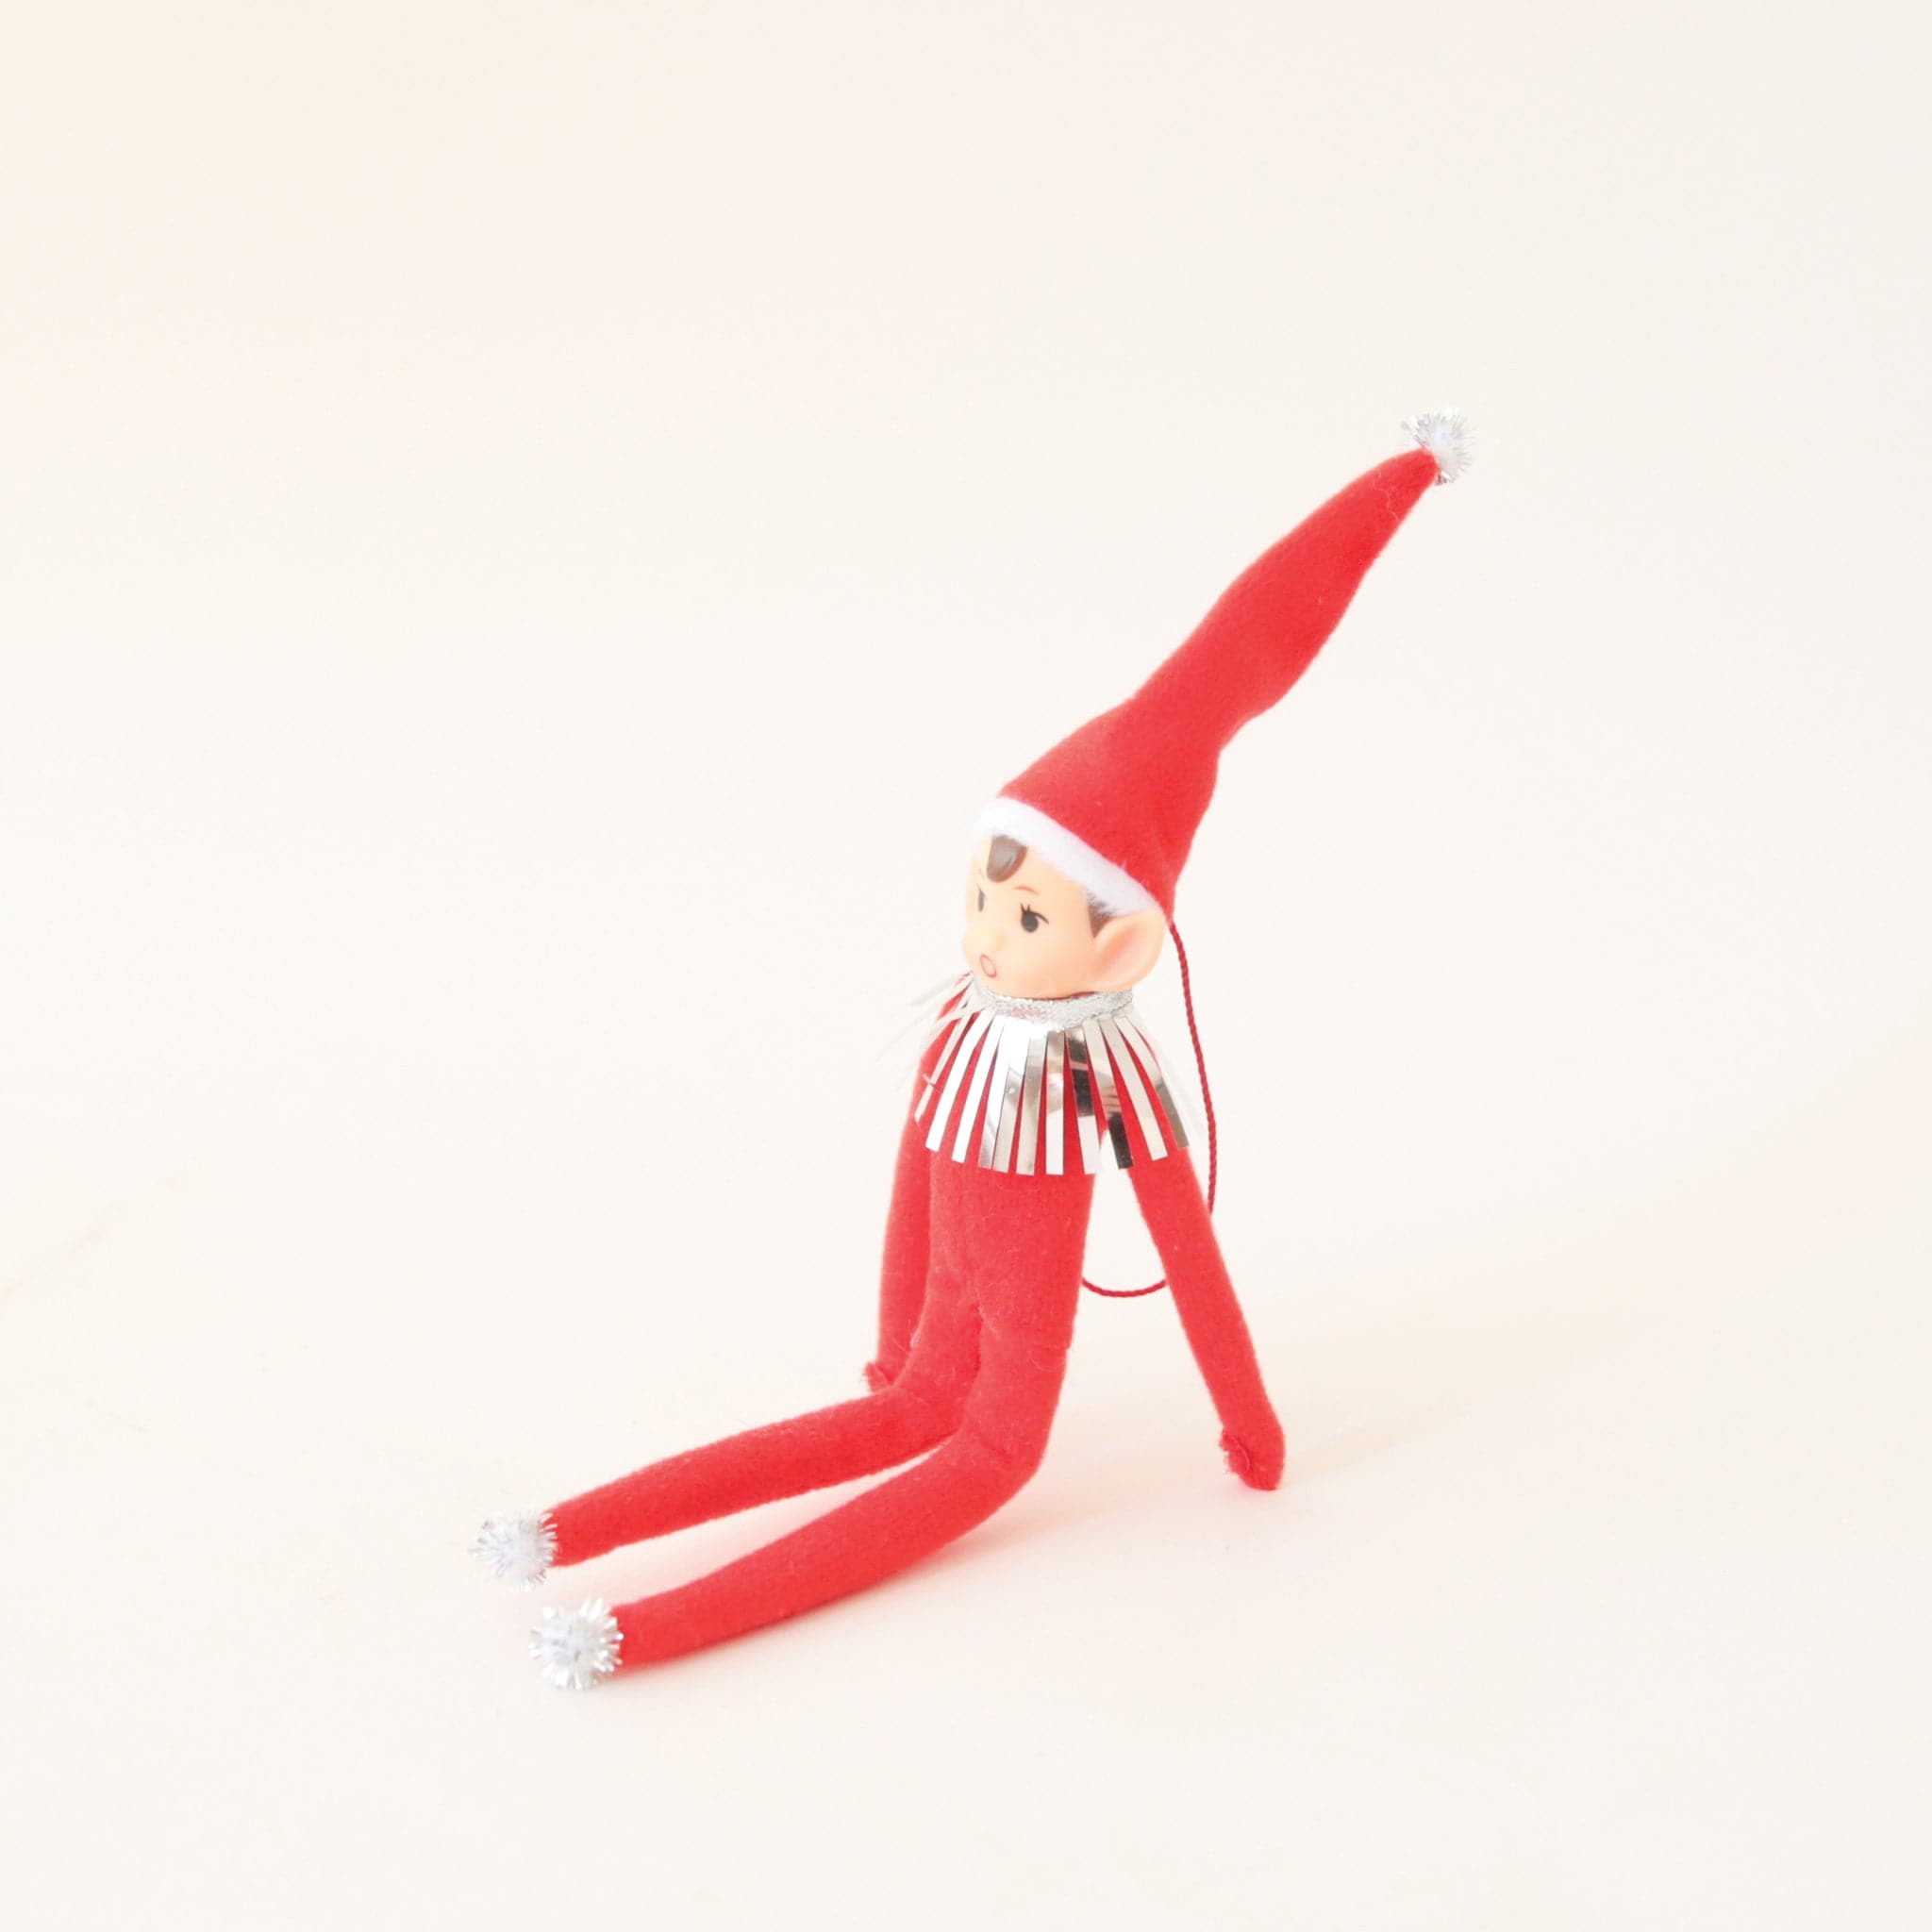 On a cream background is a red elf ornament with bendy arms and legs and a red loop for hanging.